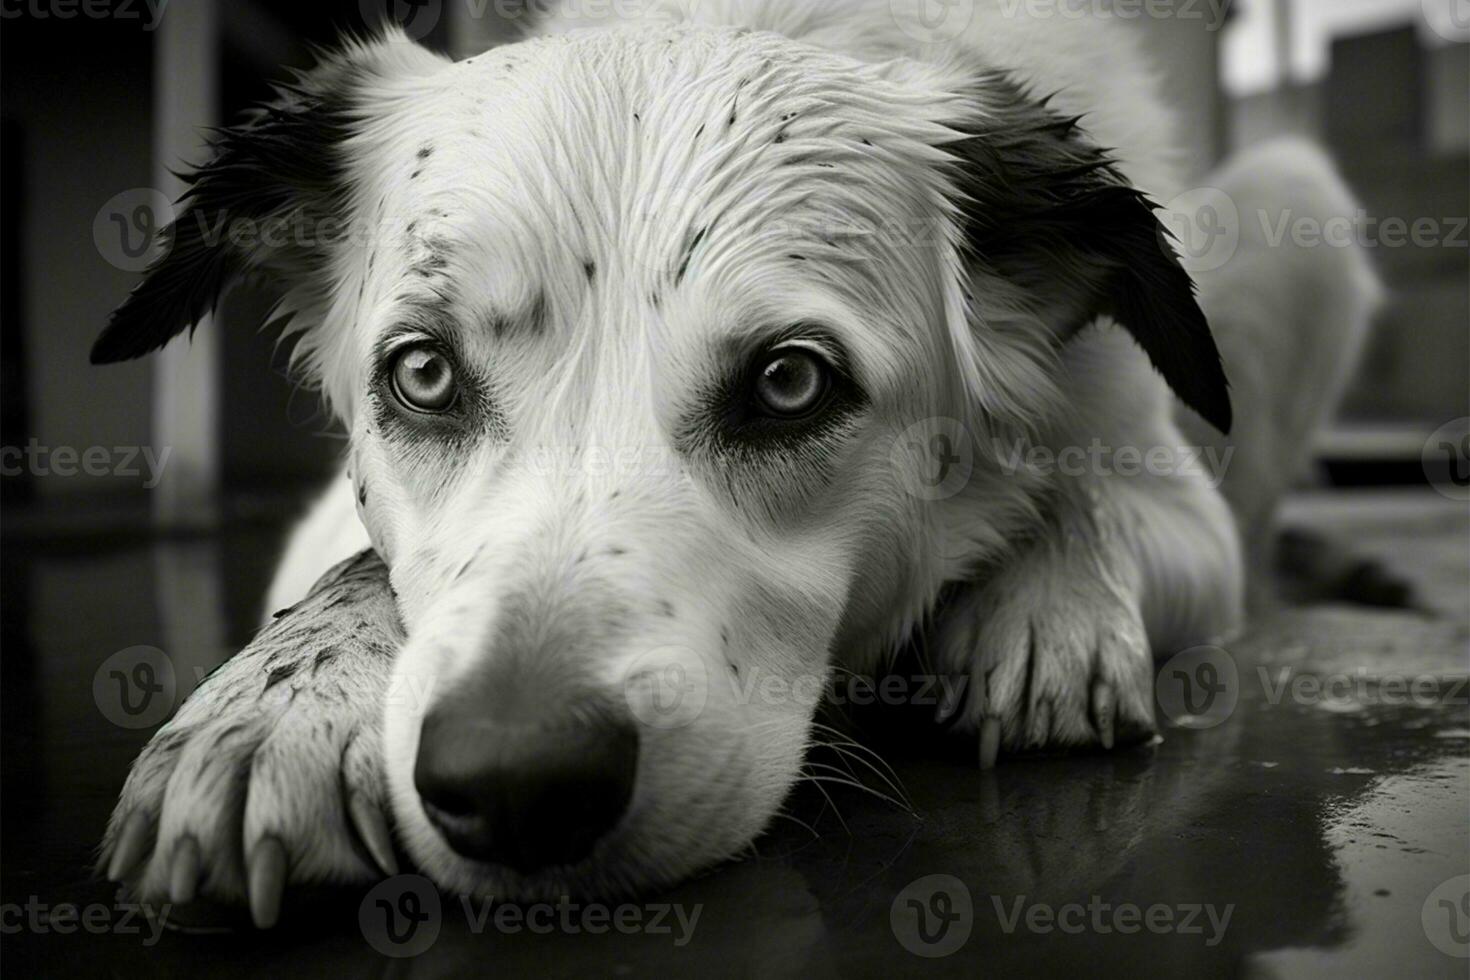 Tropical depression in Thailand captured through black and white dog photos AI Generated